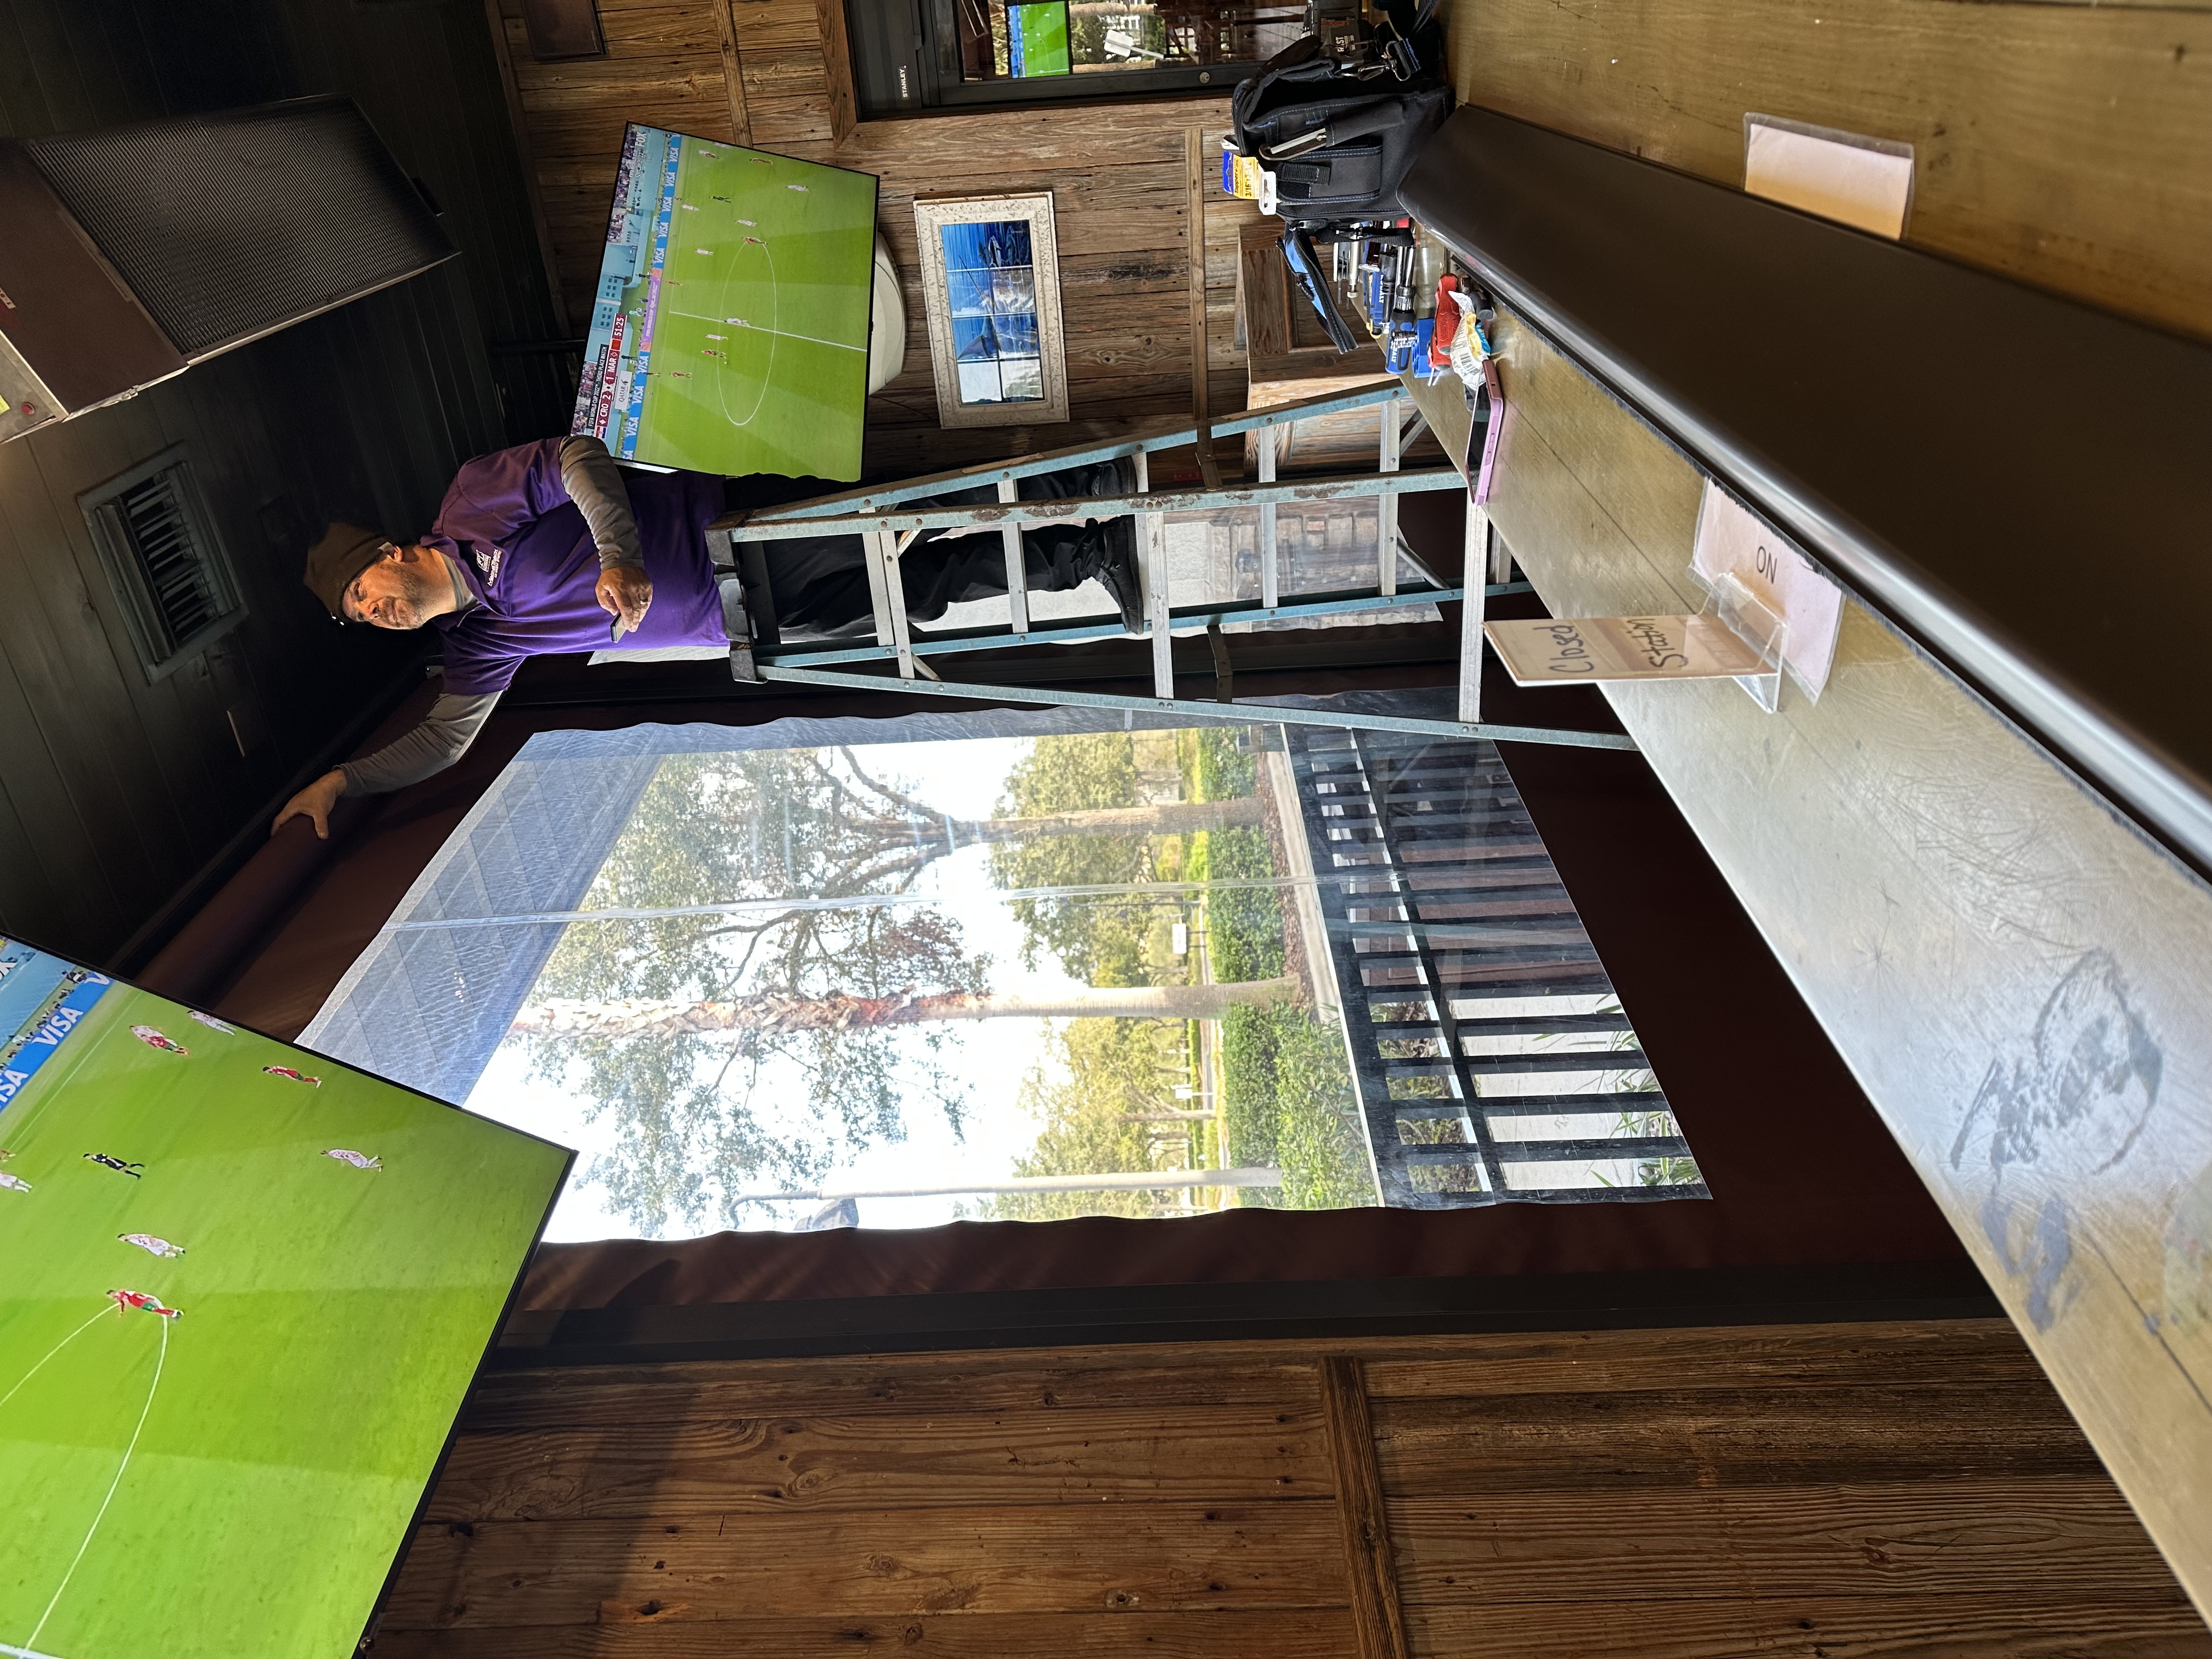 A Florida Living Outdoor Employee on a step ladder adjusts settings on a wall-mounted Motorized/Retractable screen in a bar with wood paneling and views of trees outside, enhanced by retractable screens for an unobstructed view.